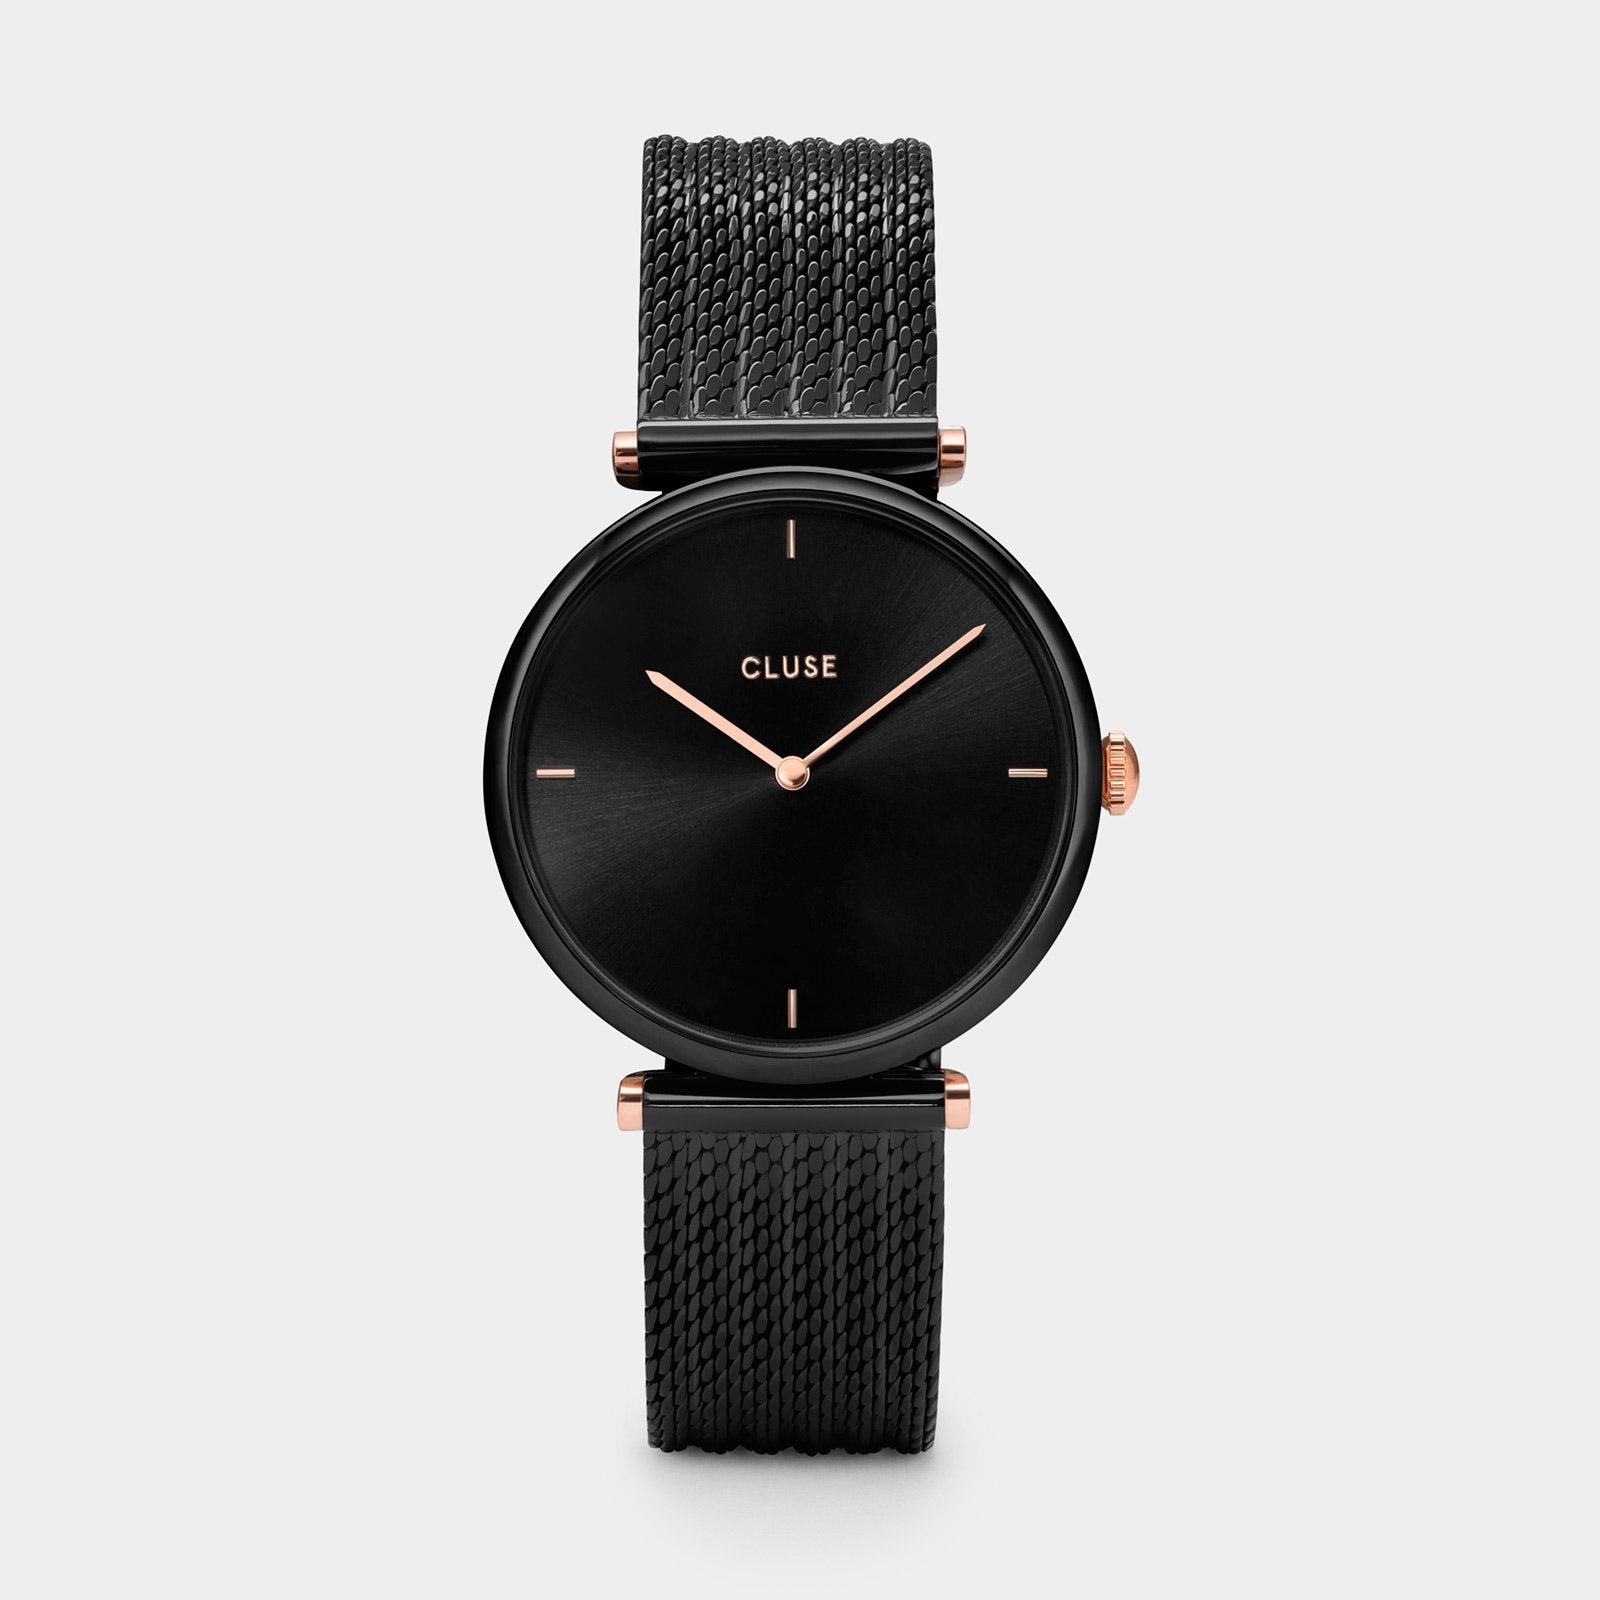 CLUSE Triomphe Watch CW0101208004 Black - Official CLUSE Store